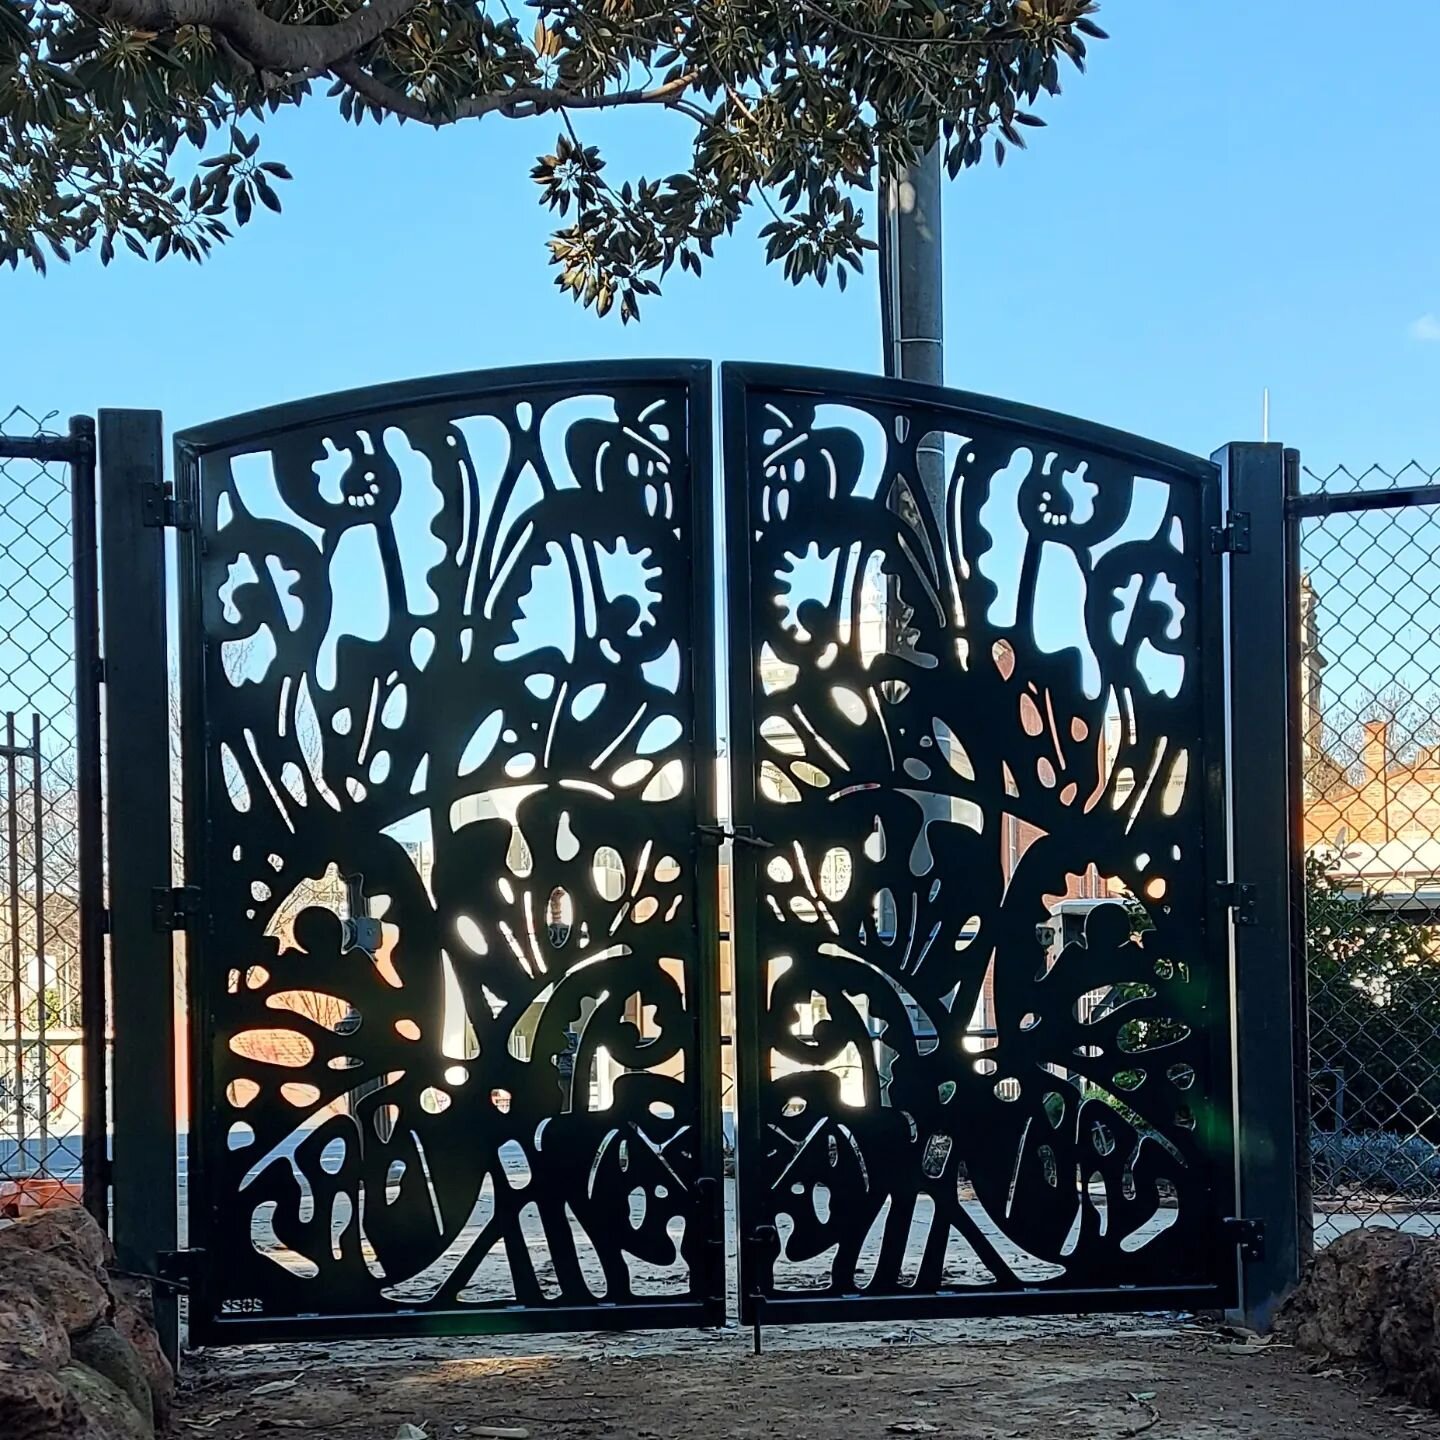 These three double hung gates were installed today, space back in my workshop now. Commissioned by the City of Greater Bendigo they are positioned around the fernery at Rosalind Park.
#rosalindpark #parks #gates #fernery #publicparks #cityofgreaterbe